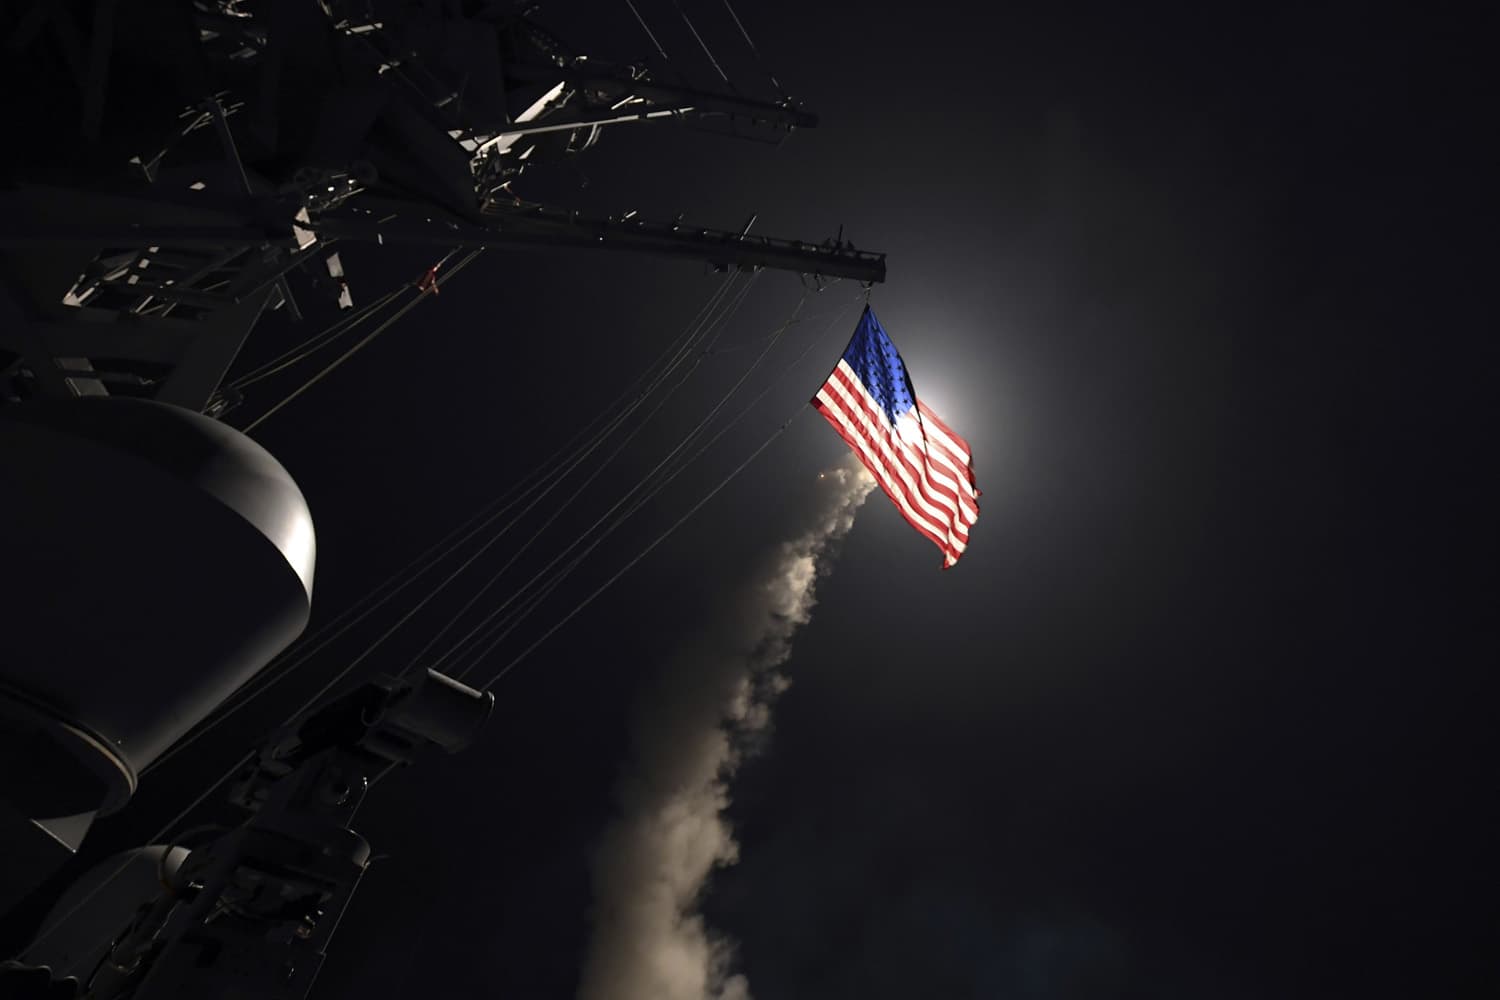 In this image provided by the U.S. Navy, the guided-missile destroyer USS Porter (DDG 78) launches a tomahawk land attack missile in the Mediterranean Sea, Friday, April 7, 2017. (U.S. Navy/AP)